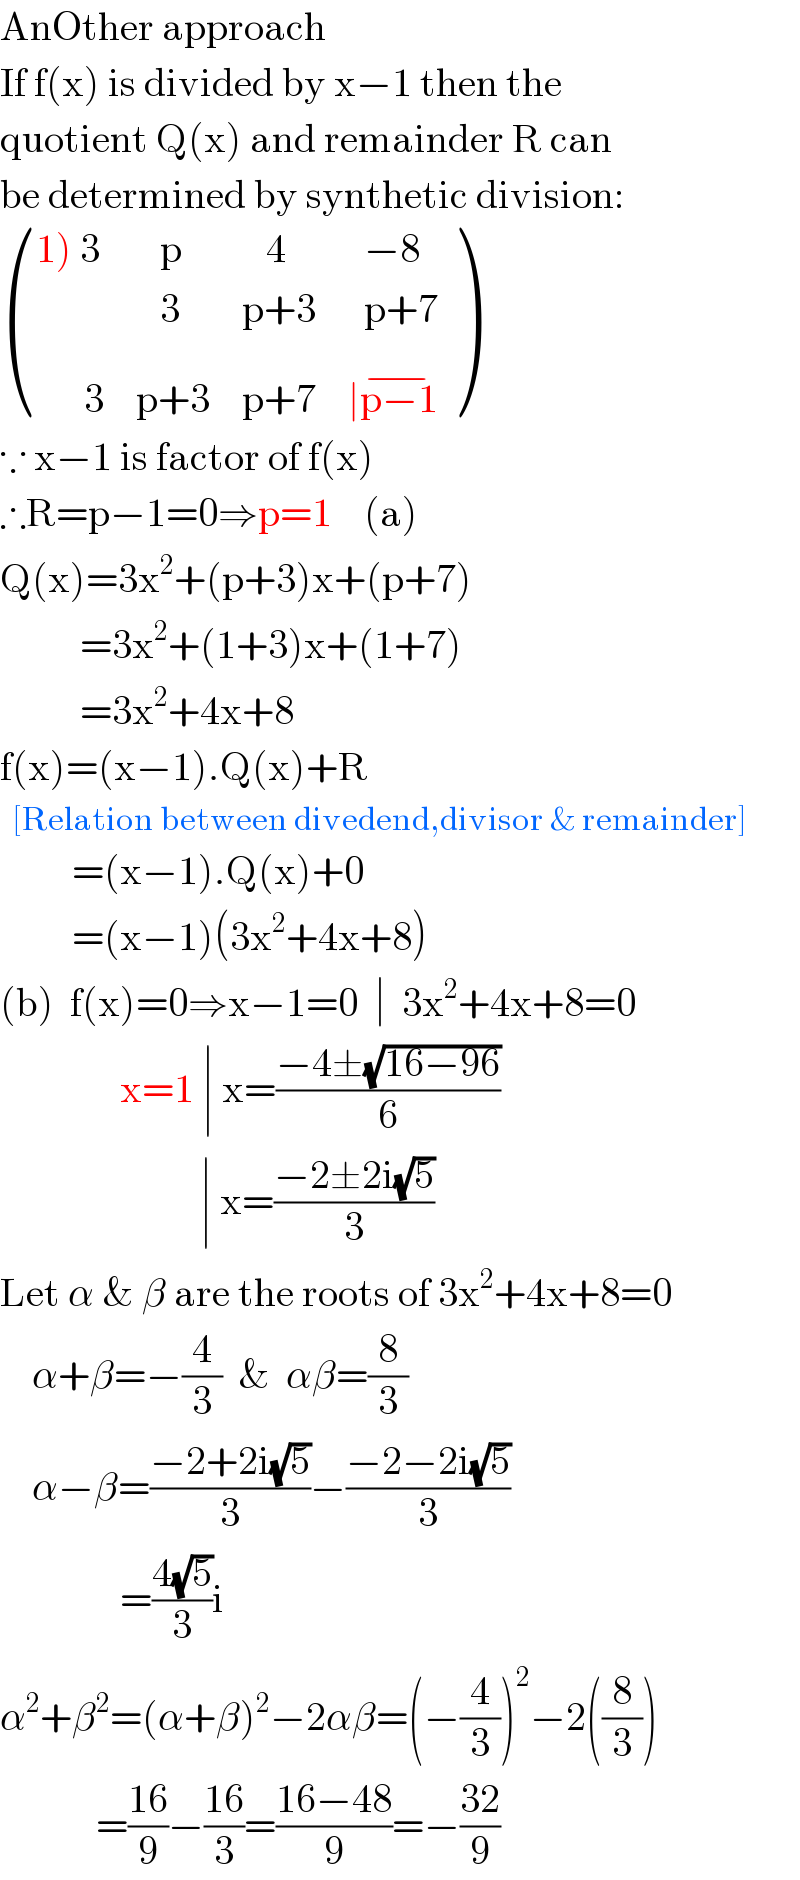 AnOther approach  If f(x) is divided by x−1 then the  quotient Q(x) and remainder R can  be determined by synthetic division:   (((1) 3),(   p),(   4),(  −8)),(,(   3),(p+3),(  p+7)),((      3),(p+3),(p+7),(∣p−1^(−) )) )  ∵ x−1 is factor of f(x)  ∴R=p−1=0⇒p=1    (a)  Q(x)=3x^2 +(p+3)x+(p+7)            =3x^2 +(1+3)x+(1+7)            =3x^2 +4x+8  f(x)=(x−1).Q(x)+R    [Relation between divedend,divisor & remainder]           =(x−1).Q(x)+0           =(x−1)(3x^2 +4x+8)  (b)  f(x)=0⇒x−1=0  ∣  3x^2 +4x+8=0                 x=1 ∣ x=((−4±(√(16−96)))/6)                           ∣ x=((−2±2i(√5))/3)  Let α & β are the roots of 3x^2 +4x+8=0      α+β=−(4/3)  &  αβ=(8/3)      α−β=((−2+2i(√5))/3)−((−2−2i(√5))/3)                 =((4(√5))/3)i  α^2 +β^2 =(α+β)^2 −2αβ=(−(4/3))^2 −2((8/3))              =((16)/9)−((16)/3)=((16−48)/9)=−((32)/9)  